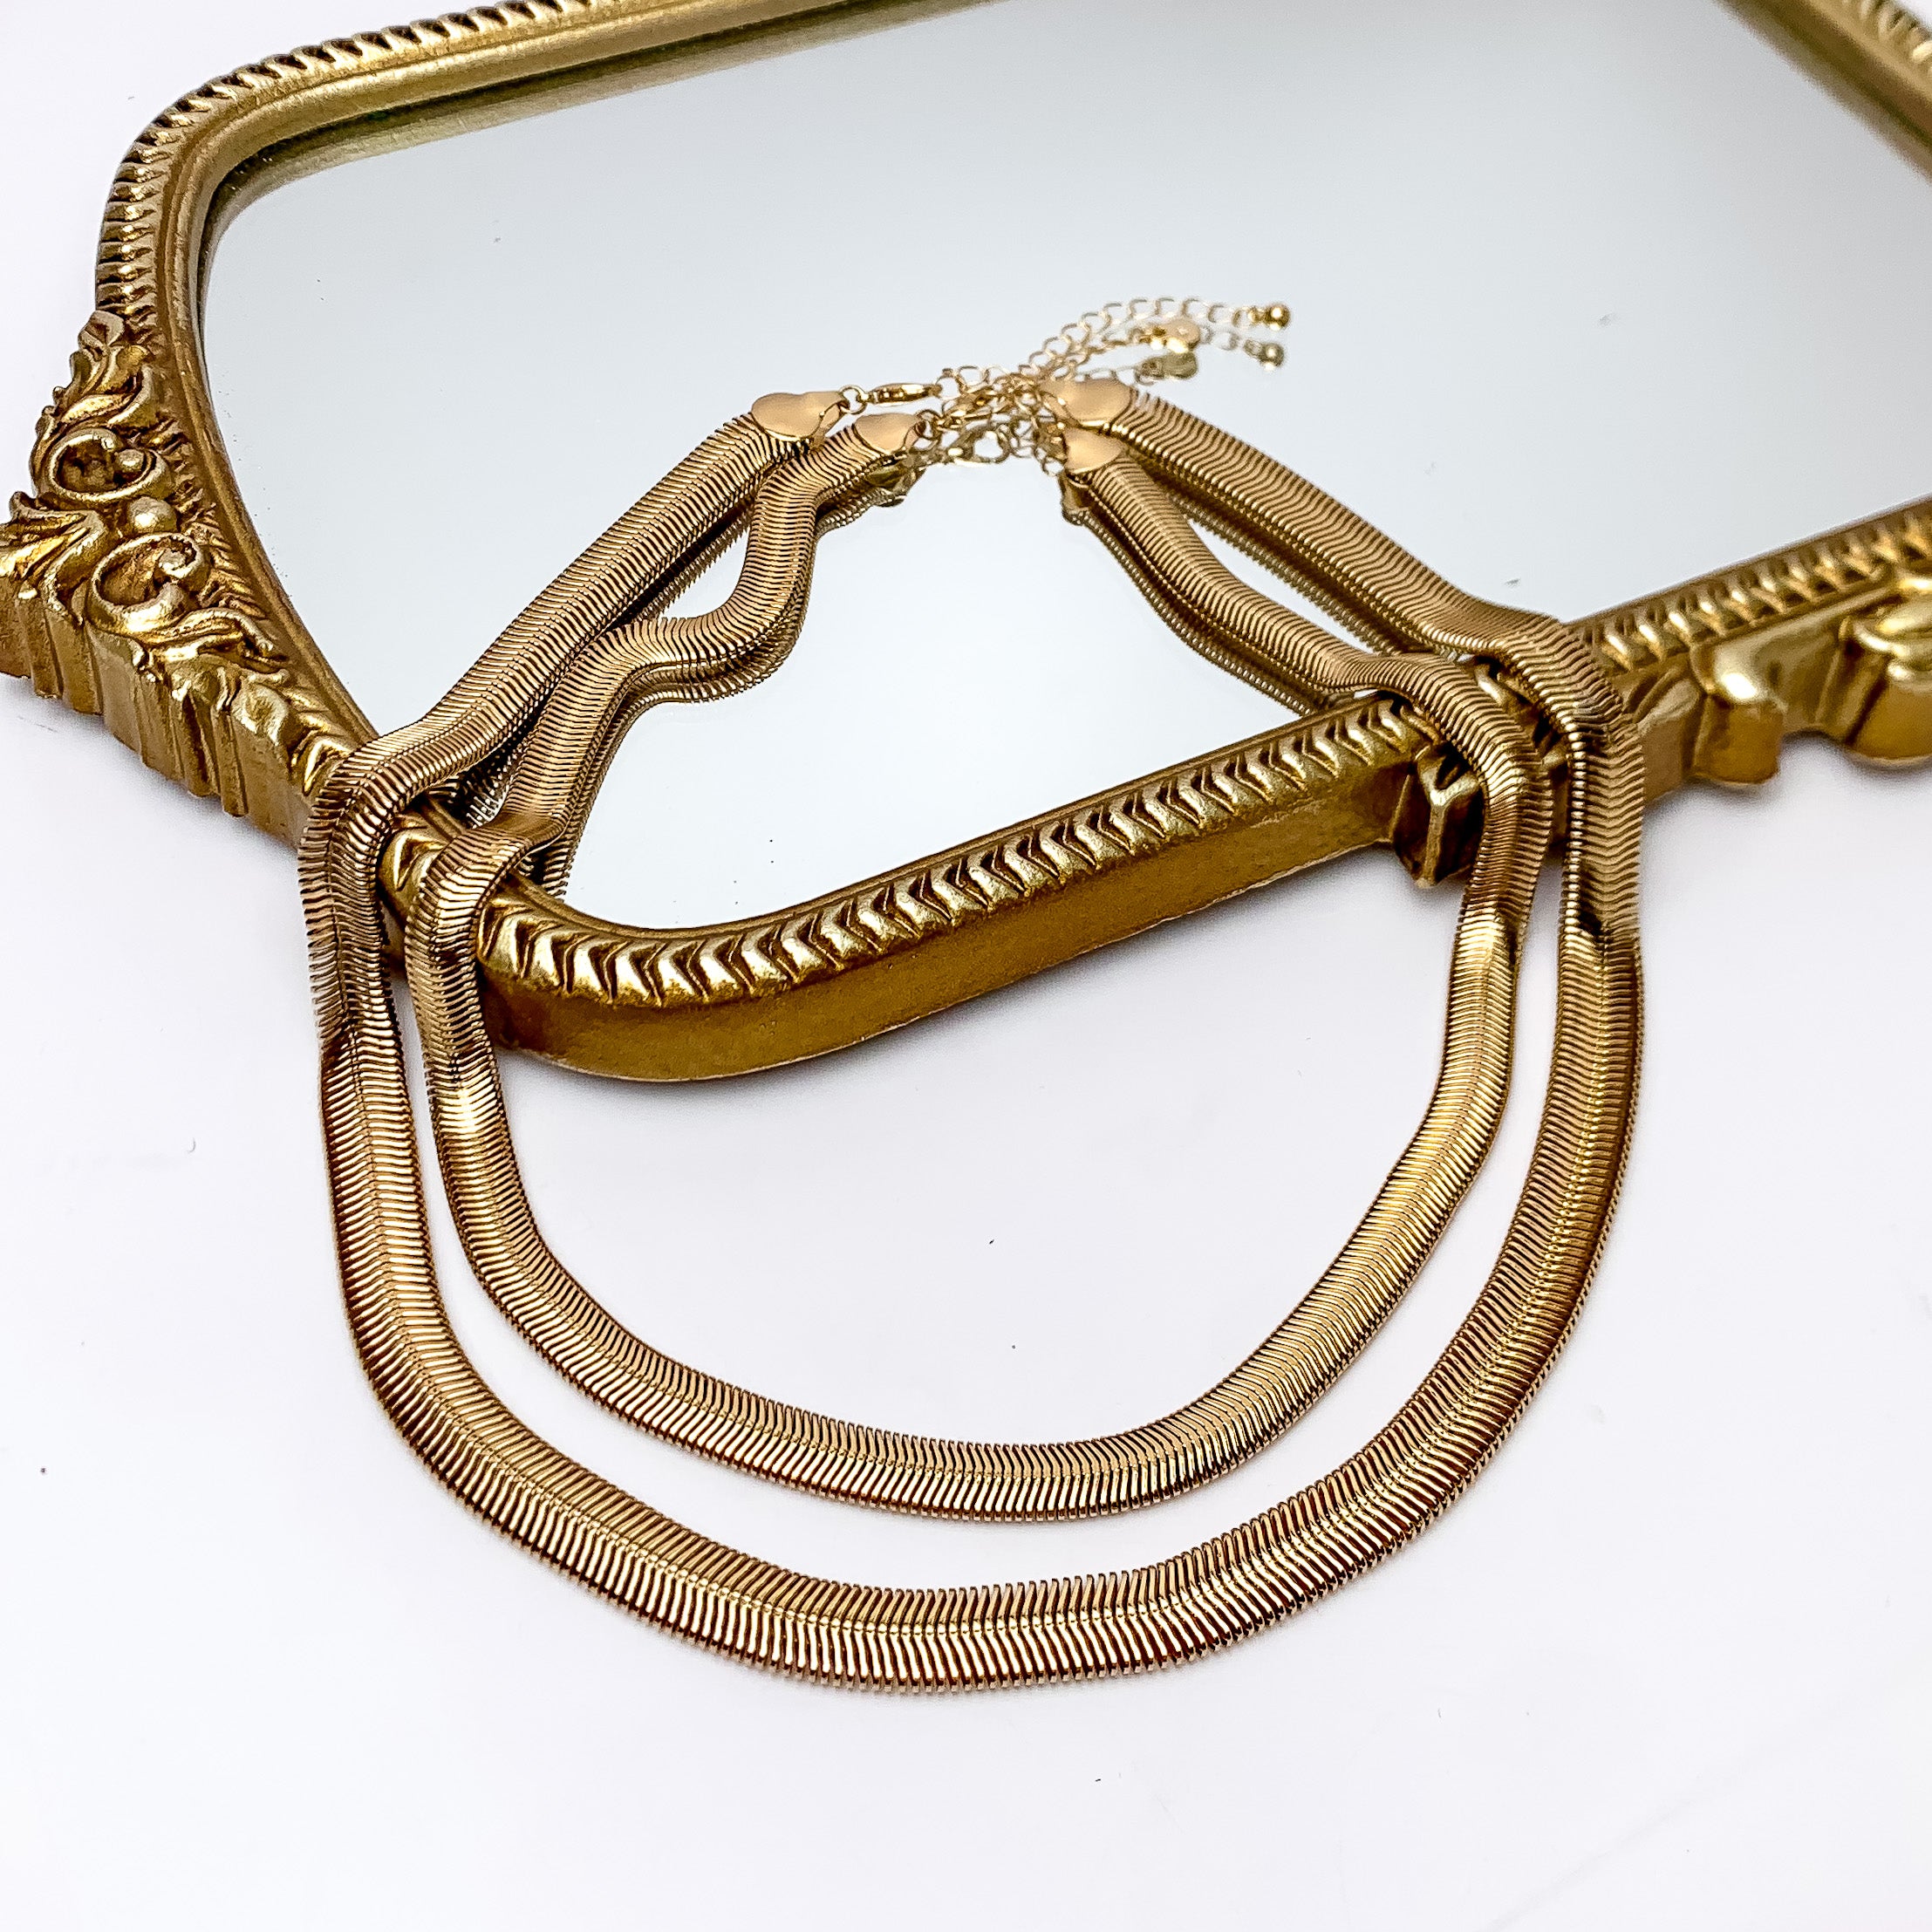 Daily Basis Gold Tone Double Chain Necklace. Pictured on a white background with part of the necklace on a mirror with a gold frame.